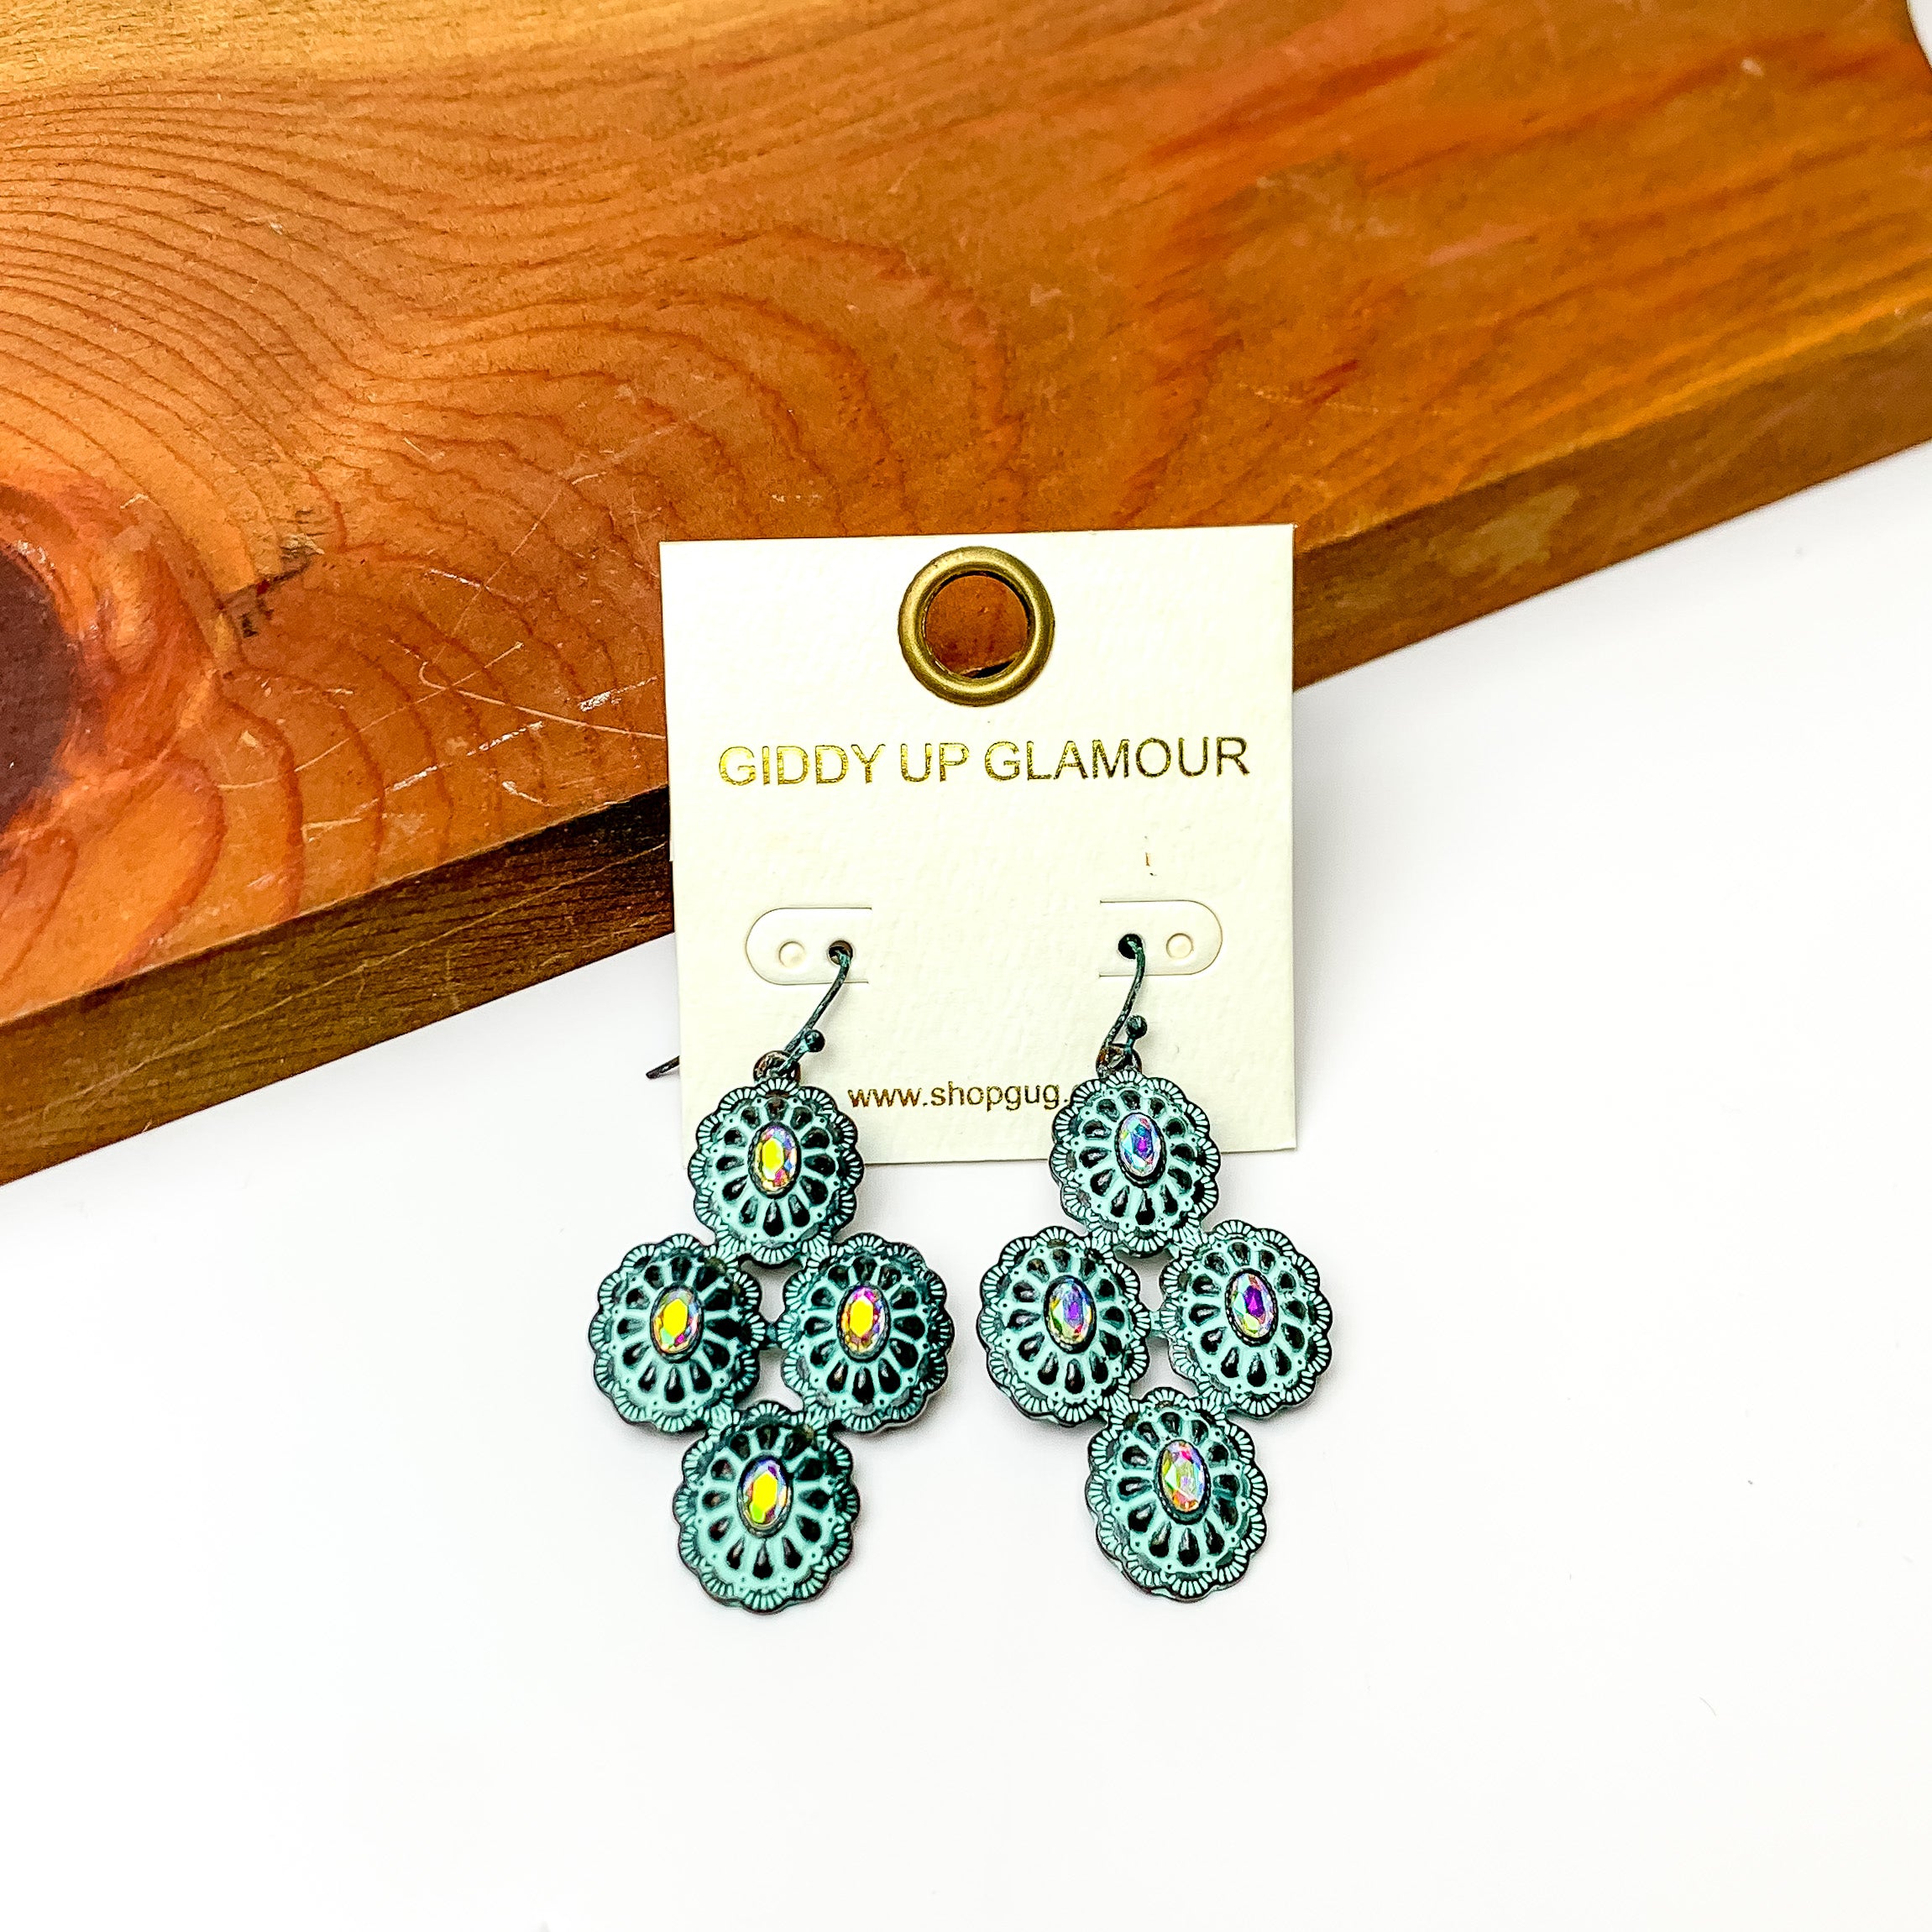 Turquoise style dangle earrings with ab crystals. Pictured on a white background with wood at the top.